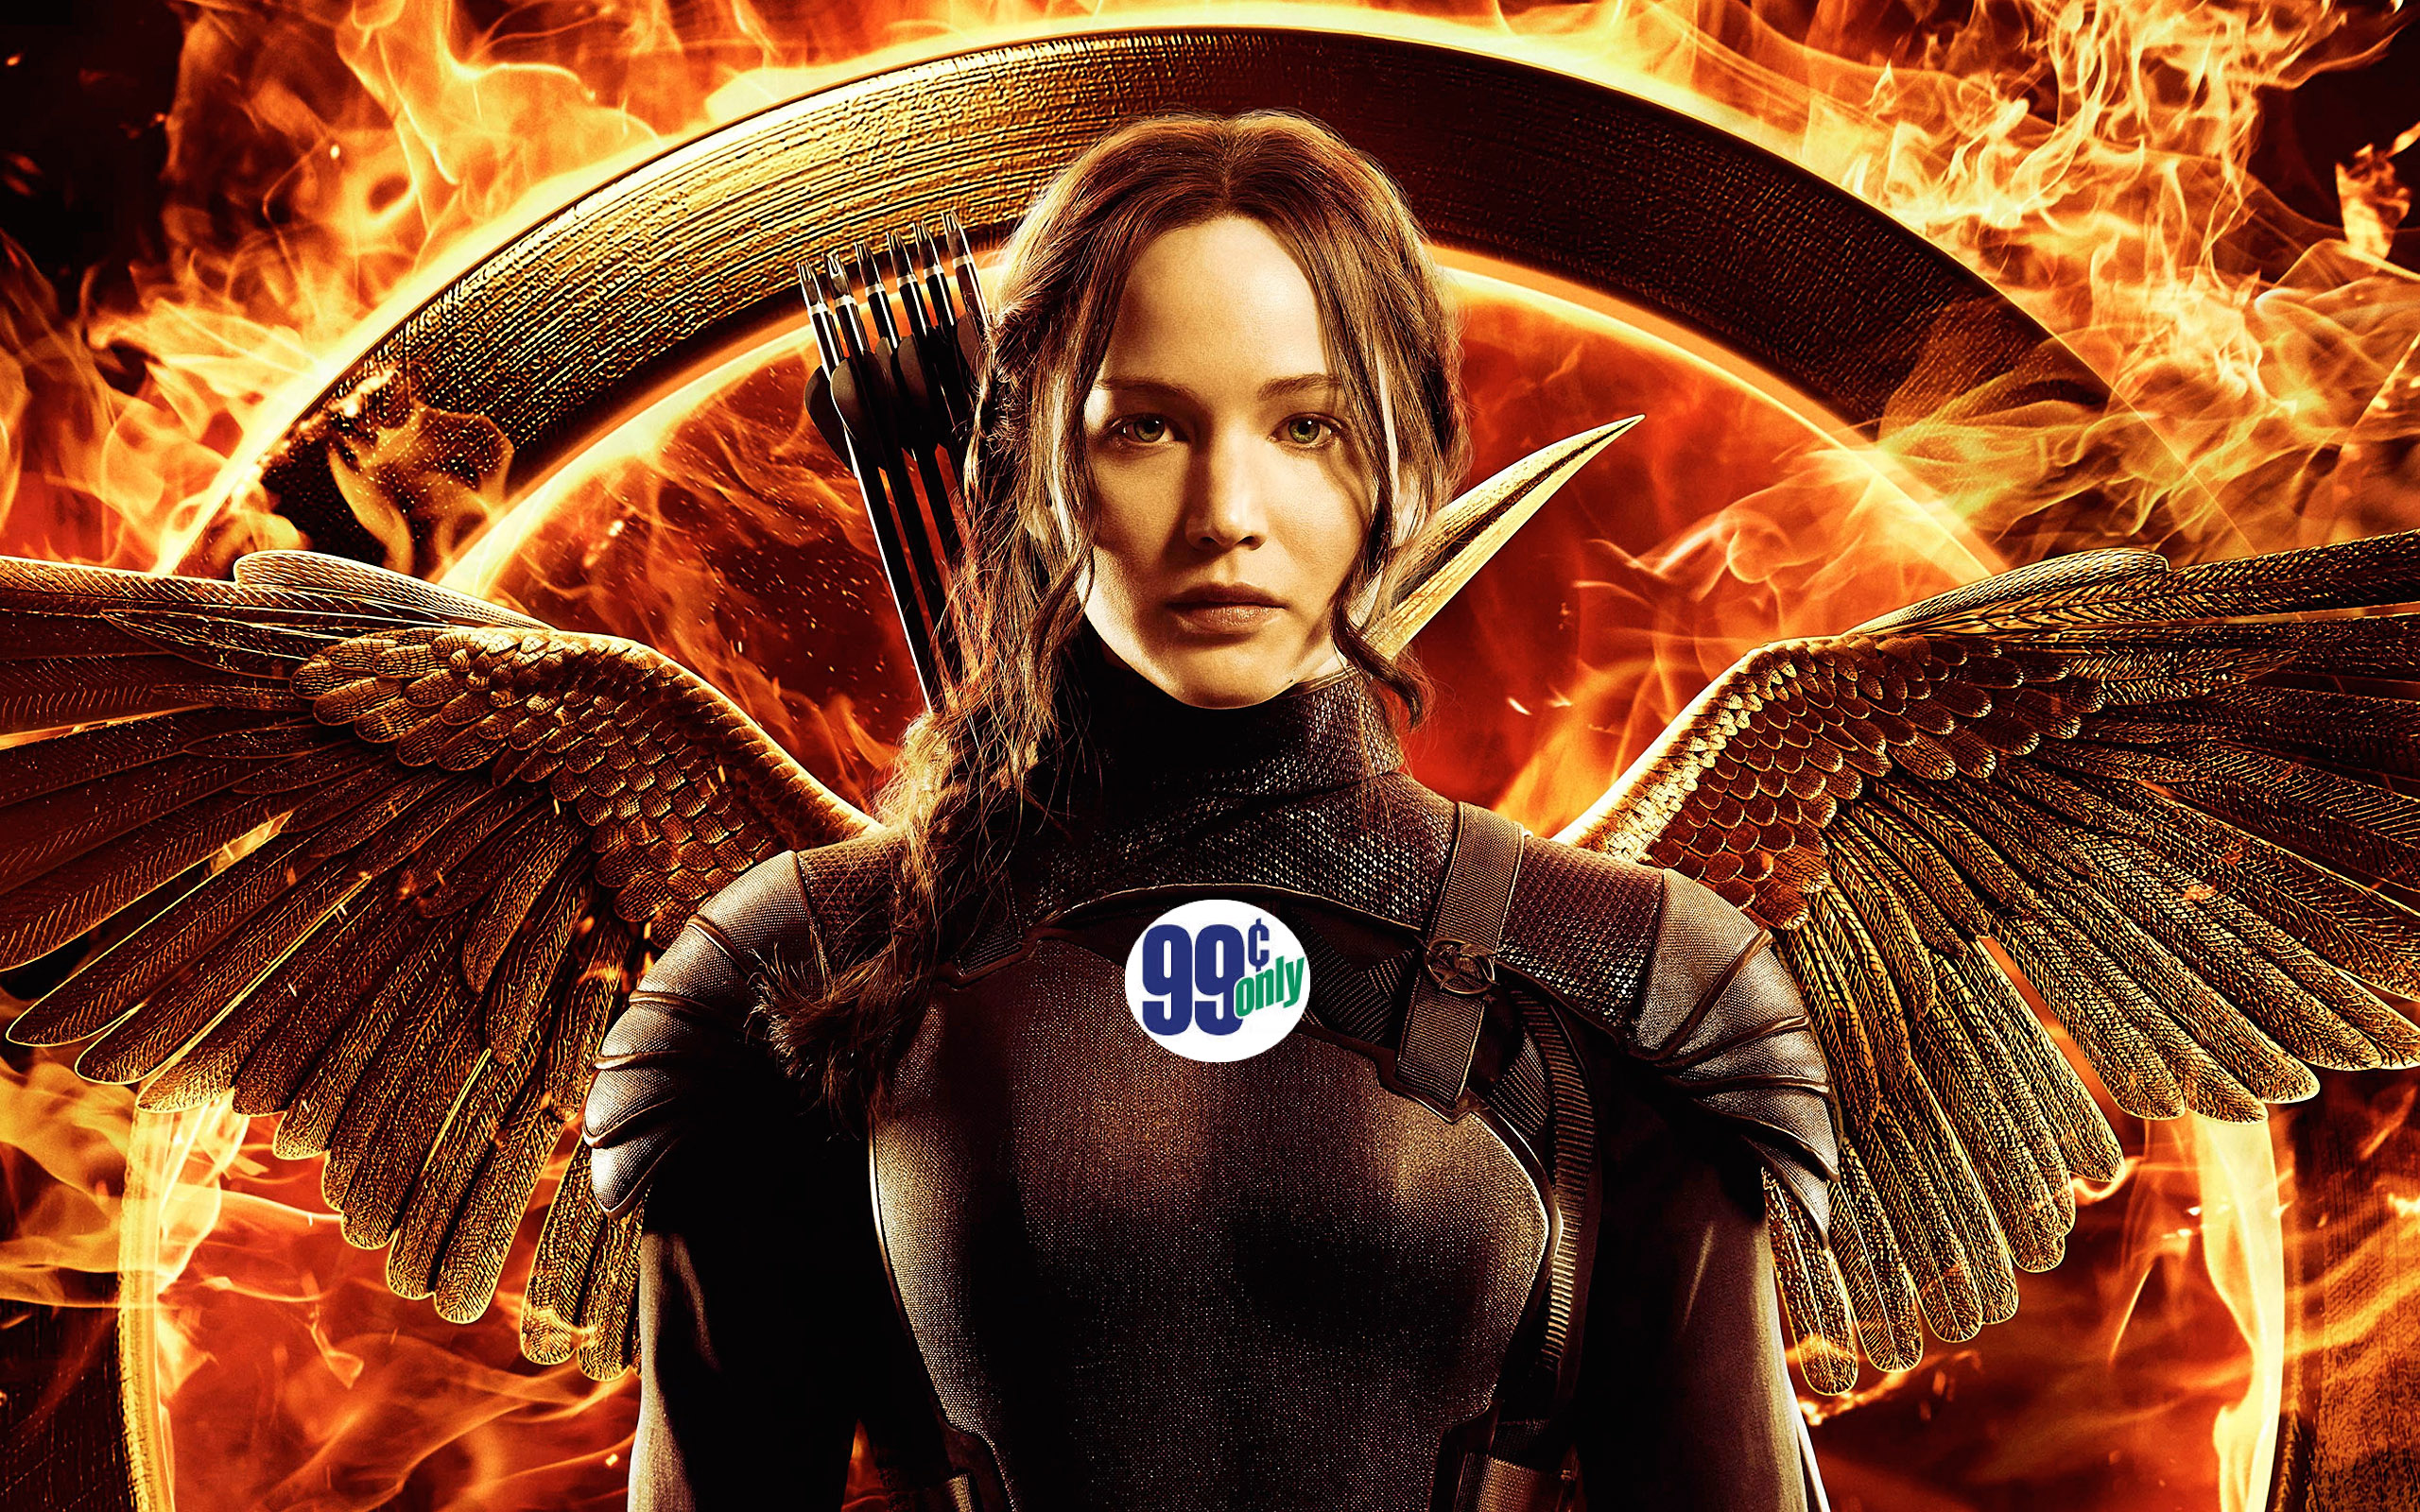 The itunes 99 cent movie rental of the week: the hunger games: mockingjay part 1